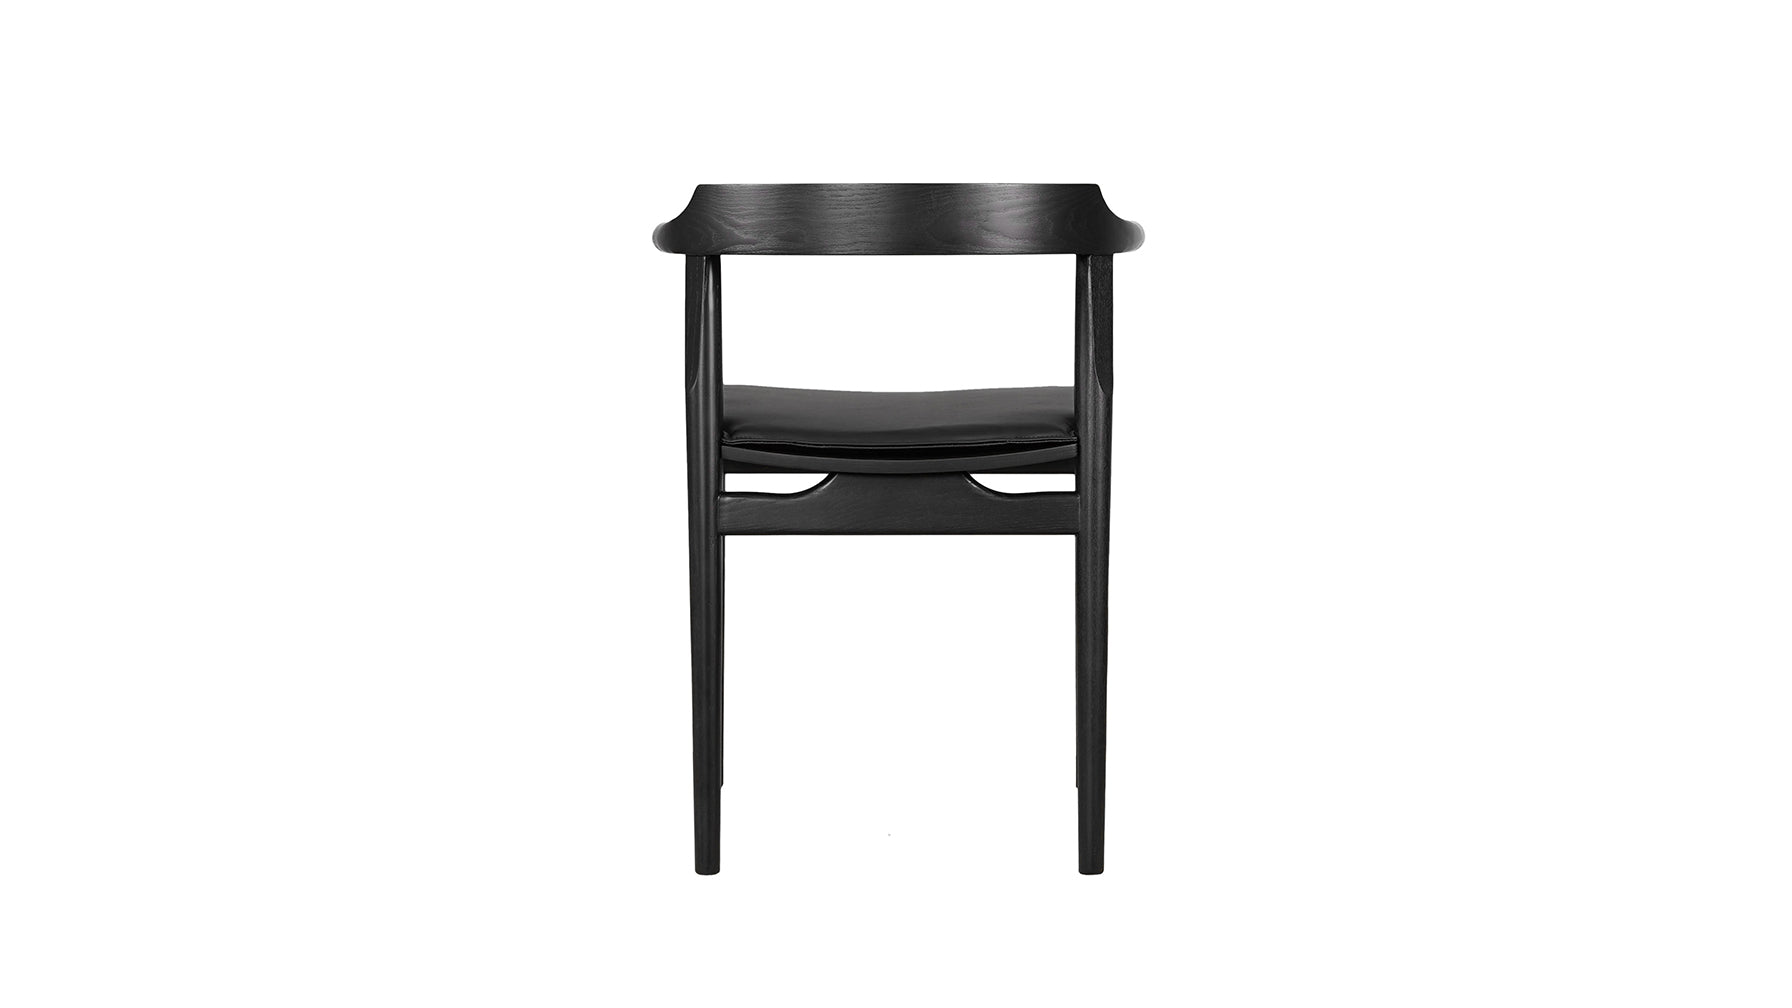 Tuck In Dining Chair with Cushion, Black Ash, Wood Seat with Black Cushion - Image 4